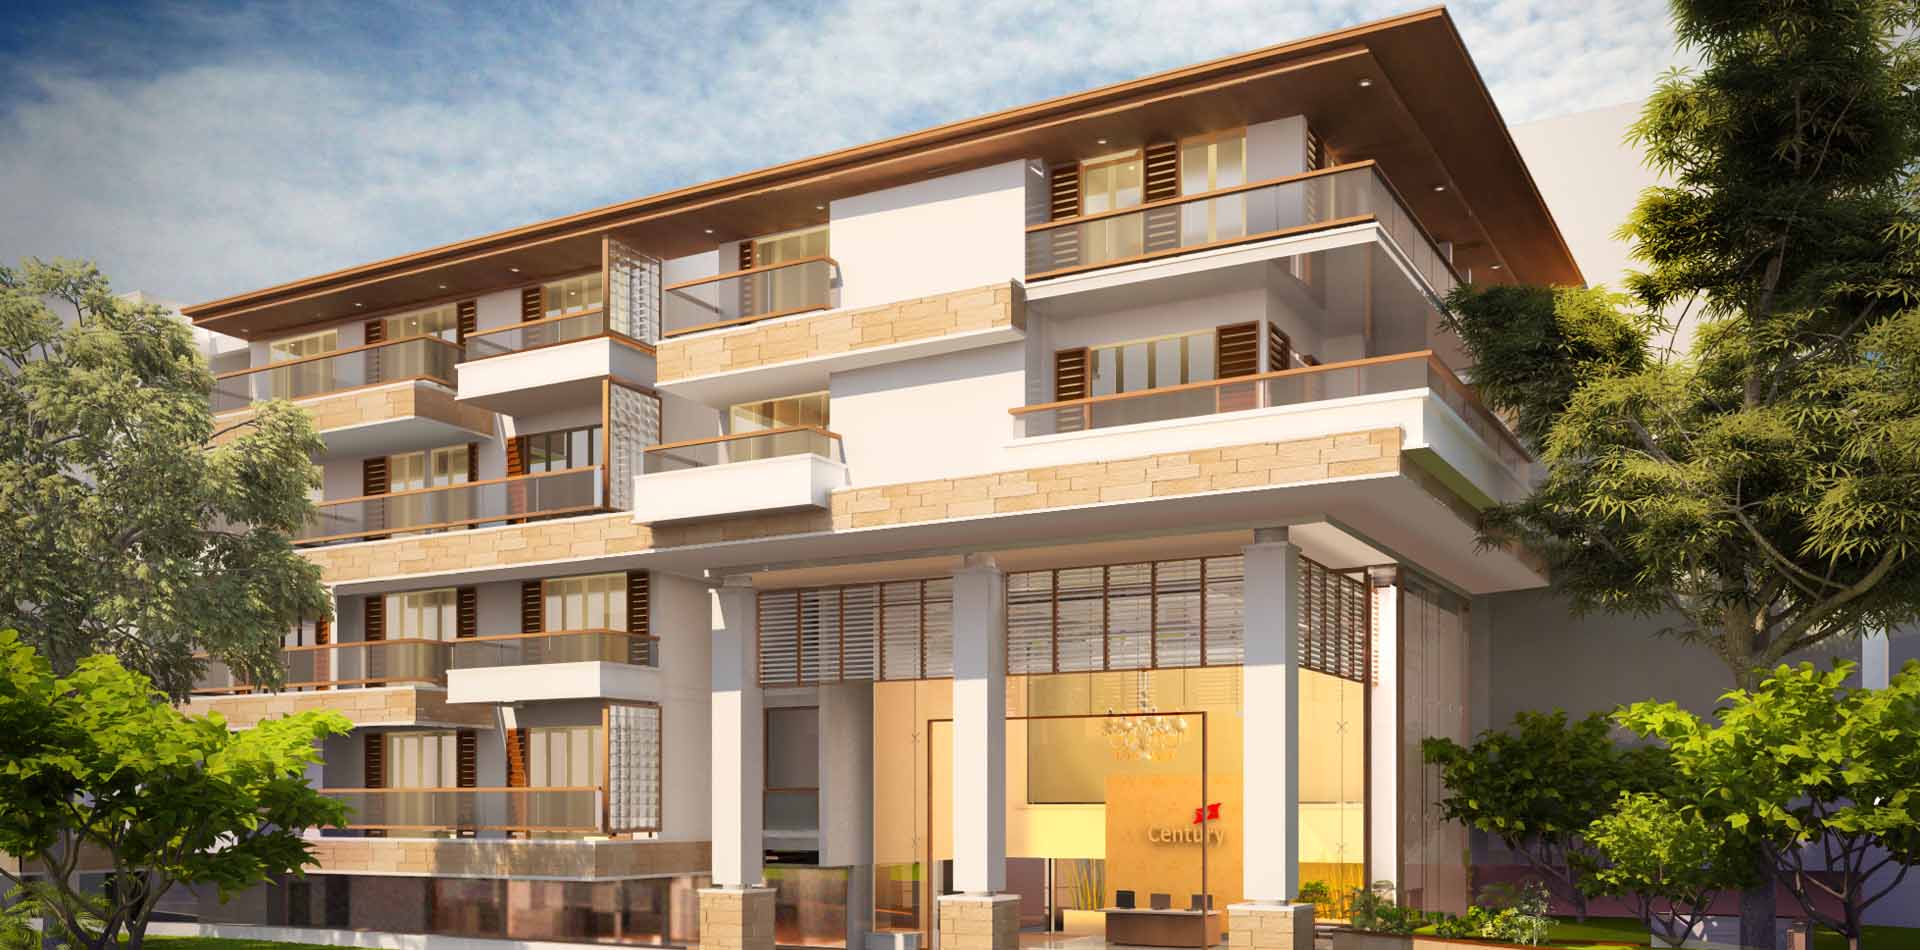 Century Renata is well planned layout & design strategy making ultra-luxury apartments